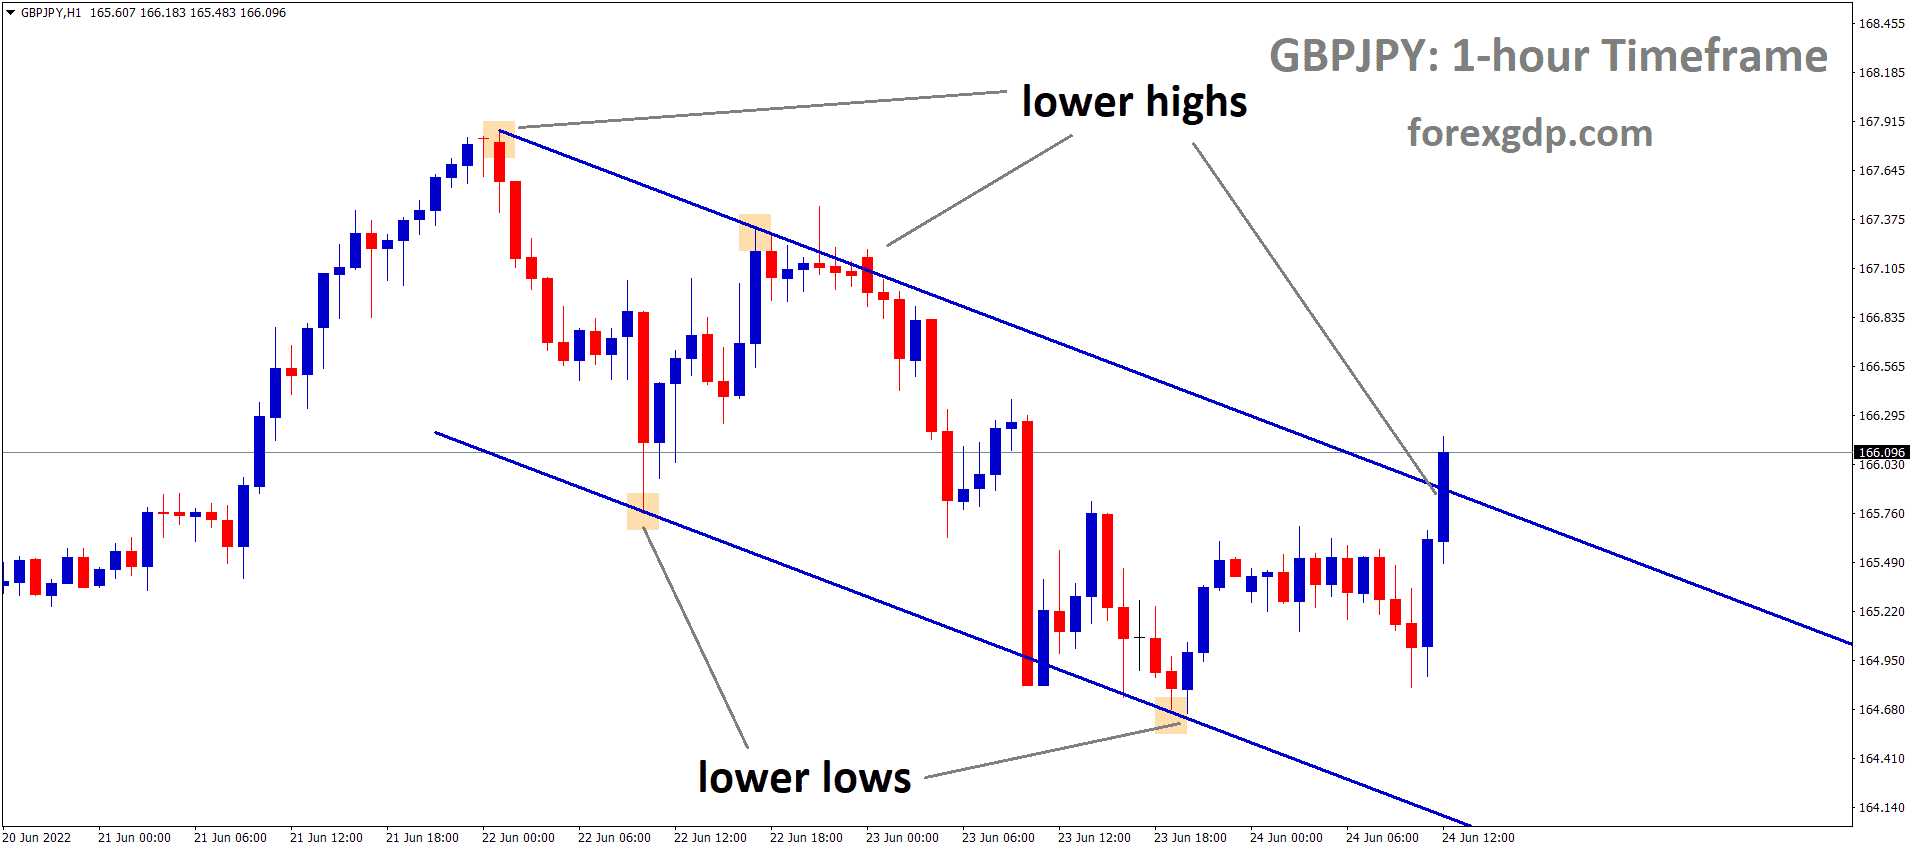 GBPJPY is moving in the Descending channel and the Market has reached the Lower high area of the Channel